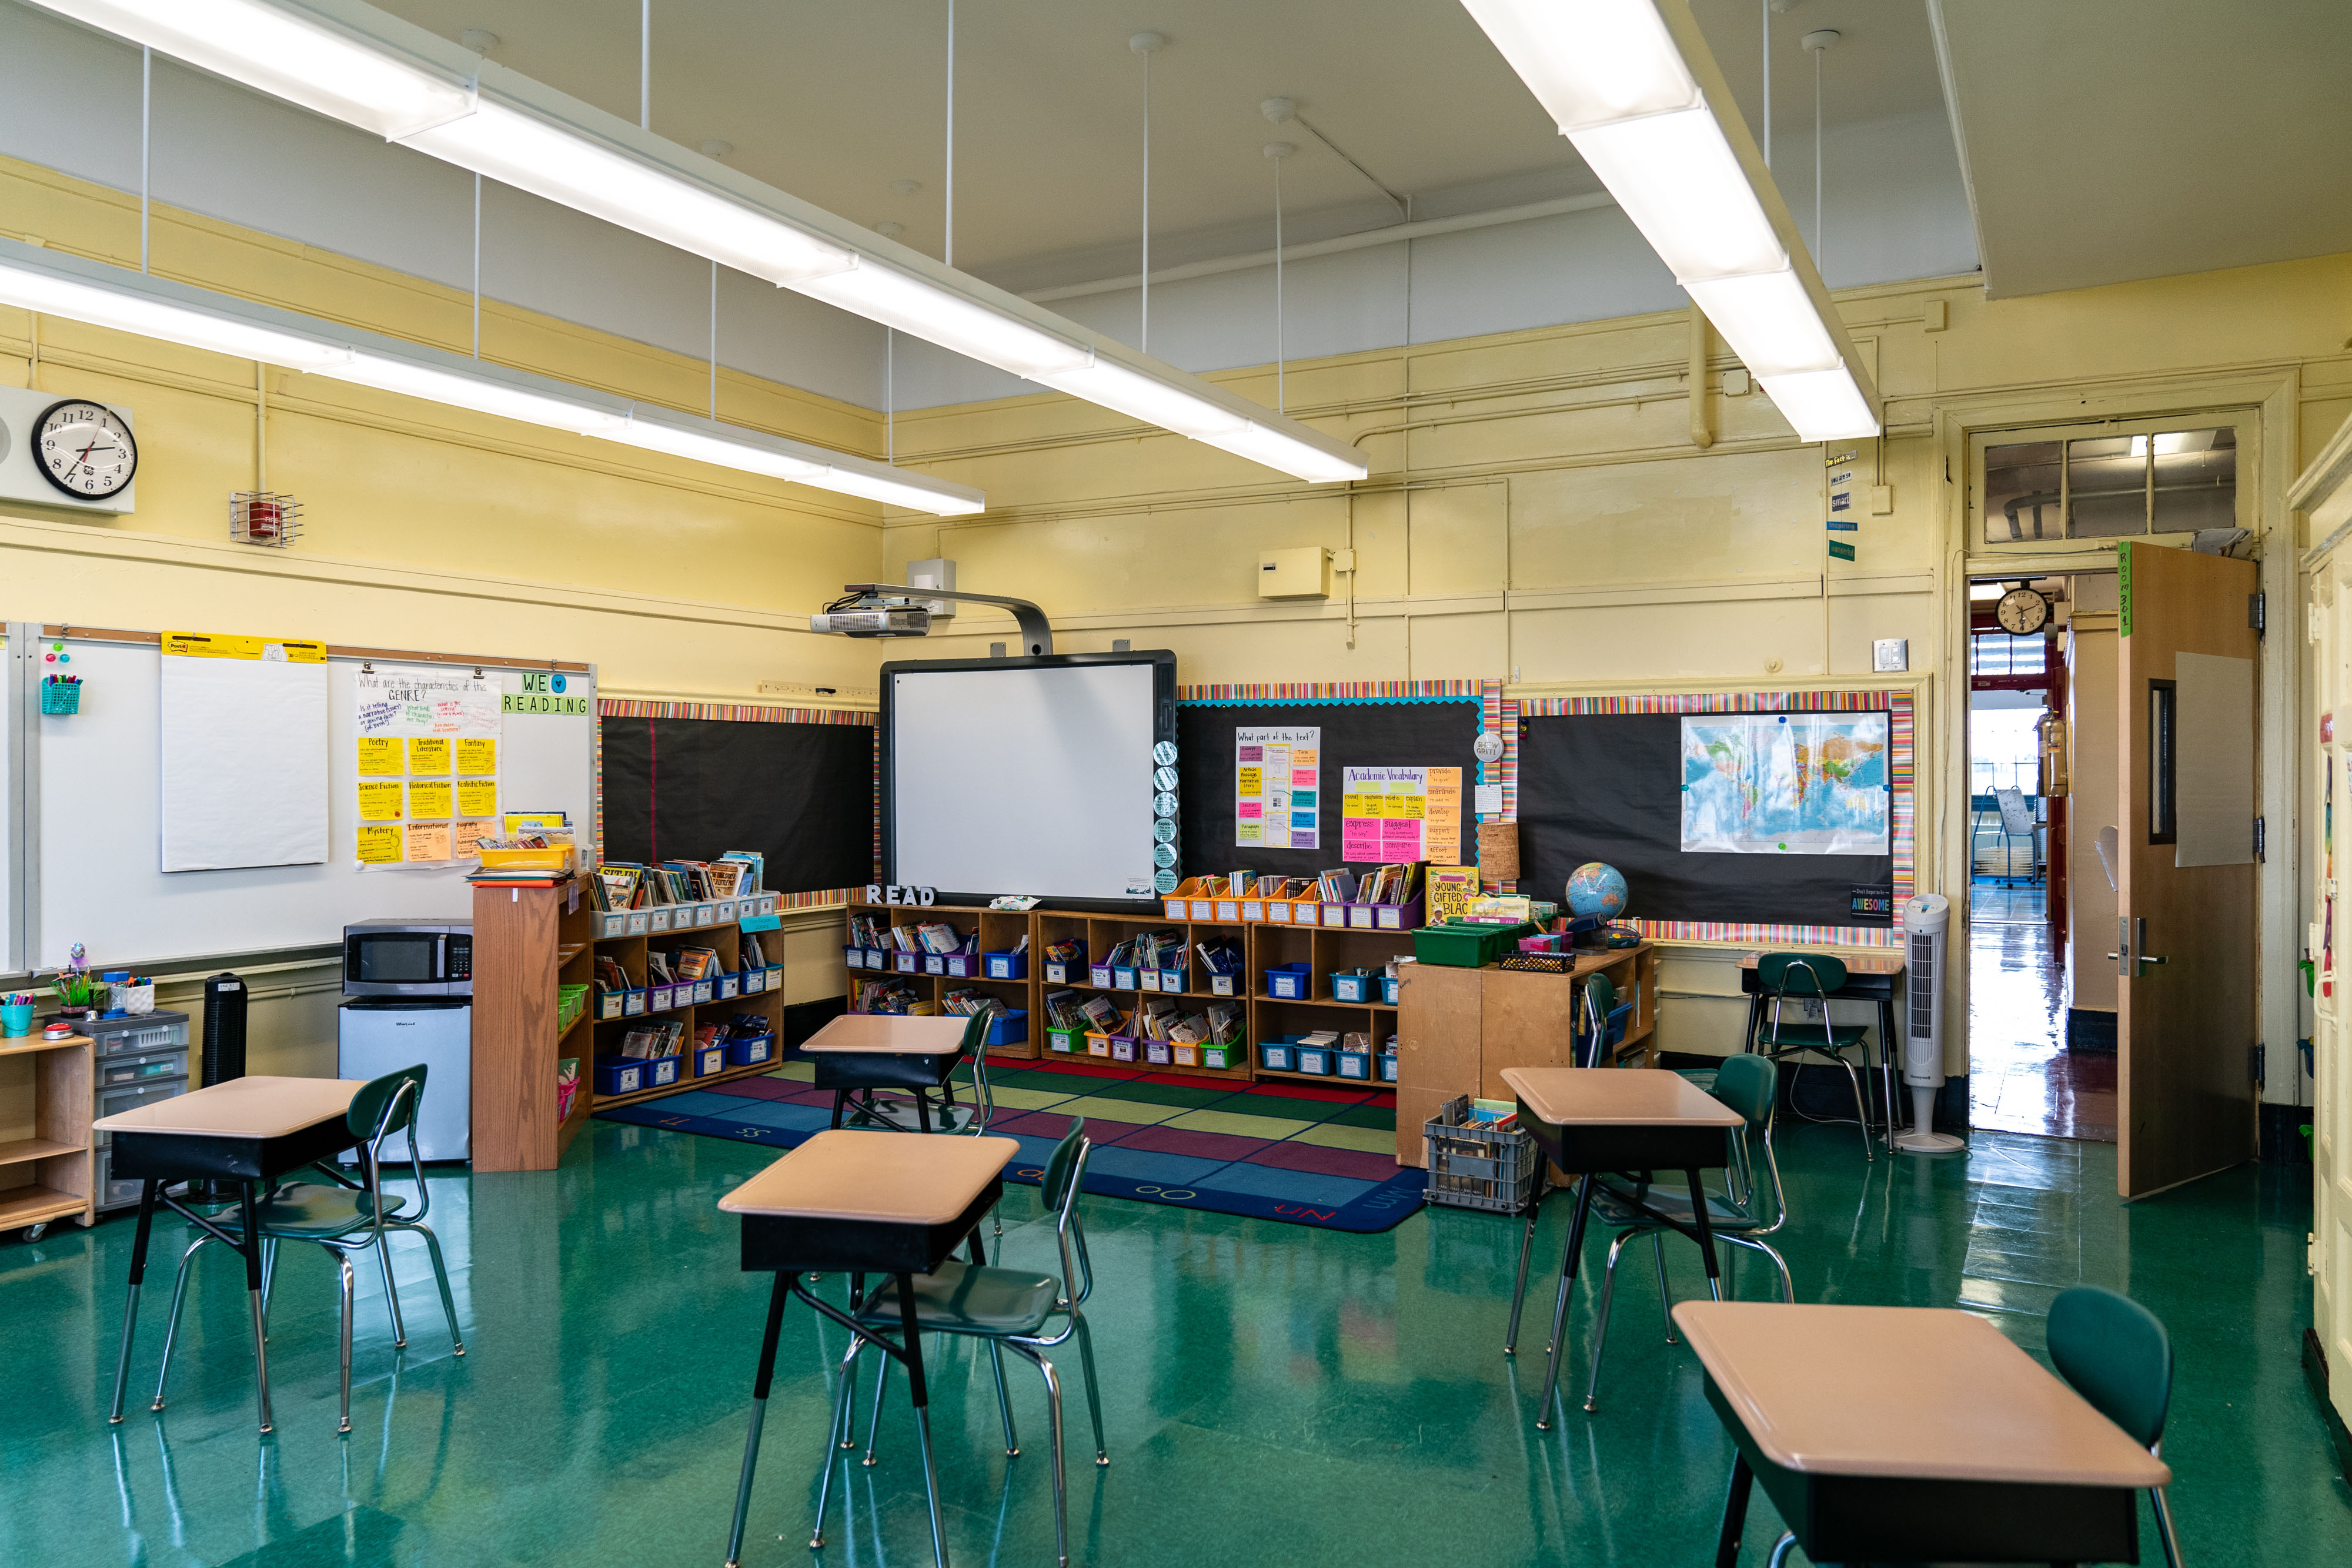 Desks are spaced apart at an elementary school in Brooklyn, New York, on August 19.